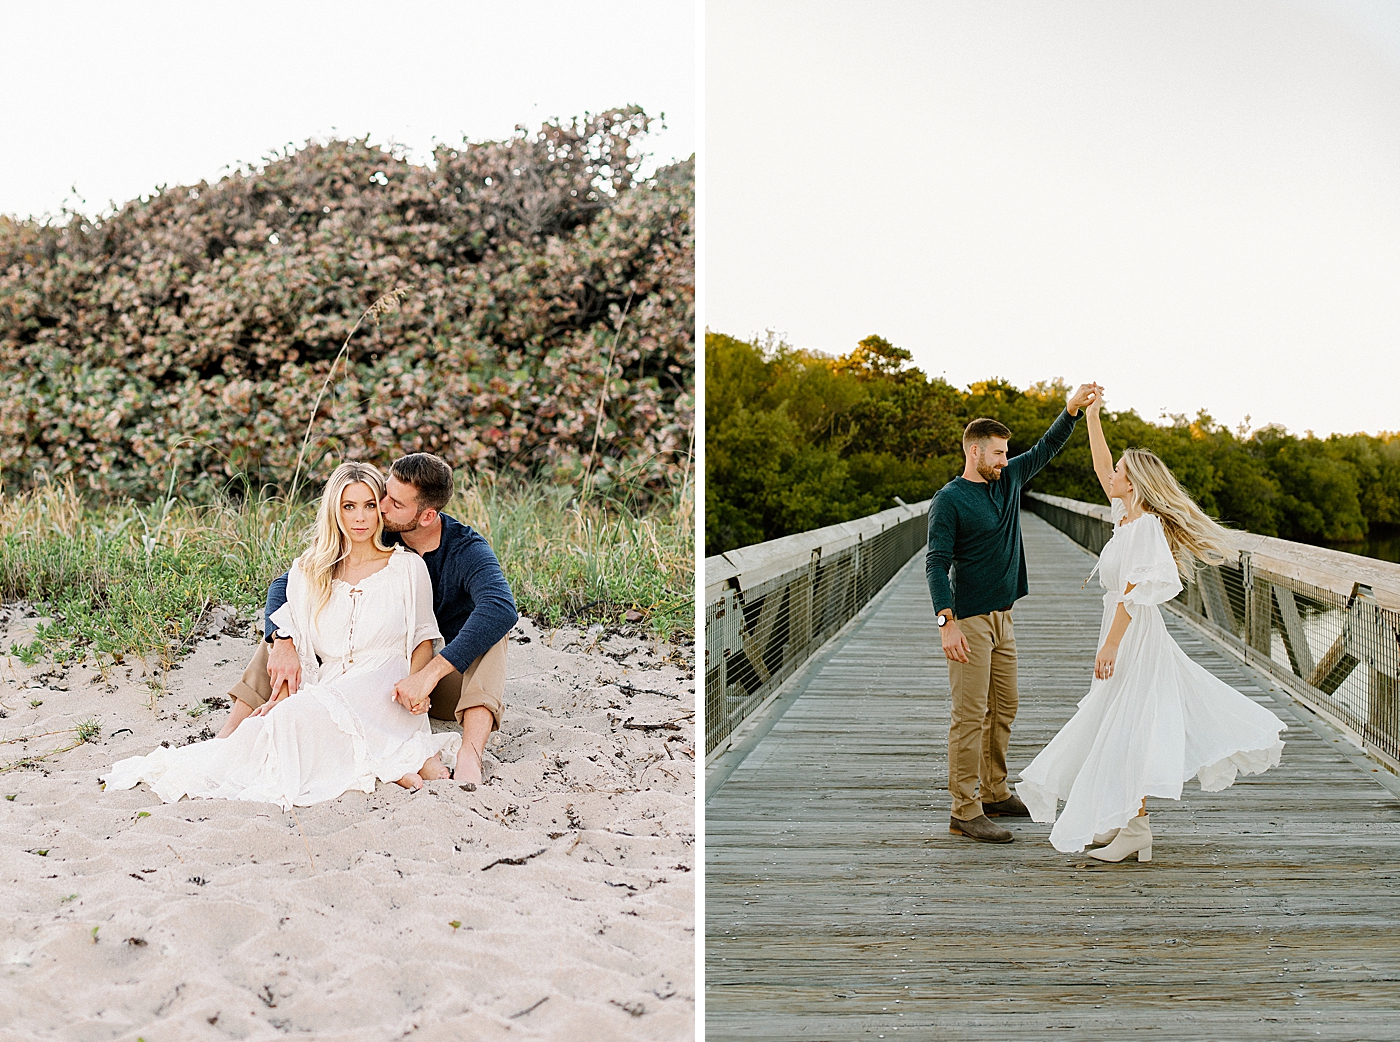 Couple sit together on sand and pirouette on wood bridge Jupiter Engagement Photography captured by South Florida Engagement Photographer Erika Tuesta Photography 